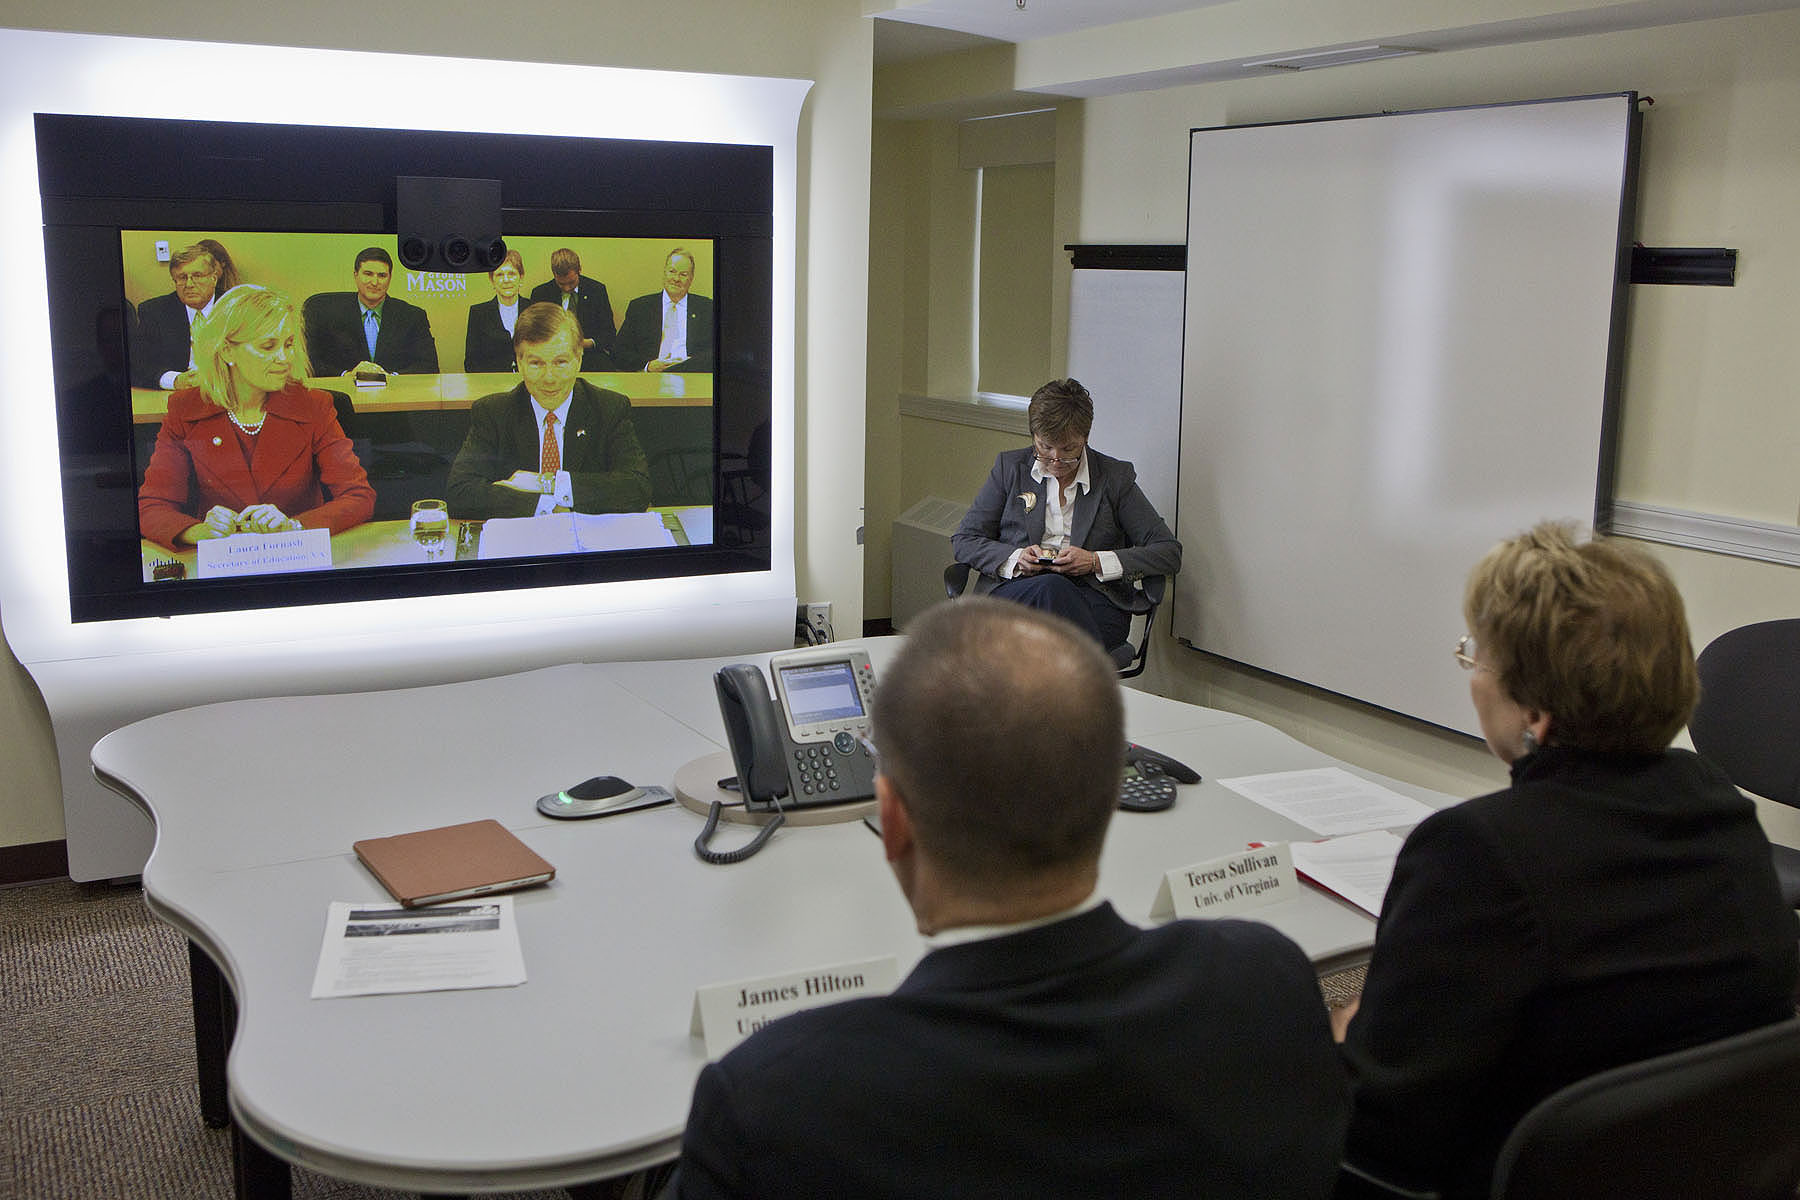 Teresa Sullivan and James Hilton in a Tele Conference with others joining on a screen